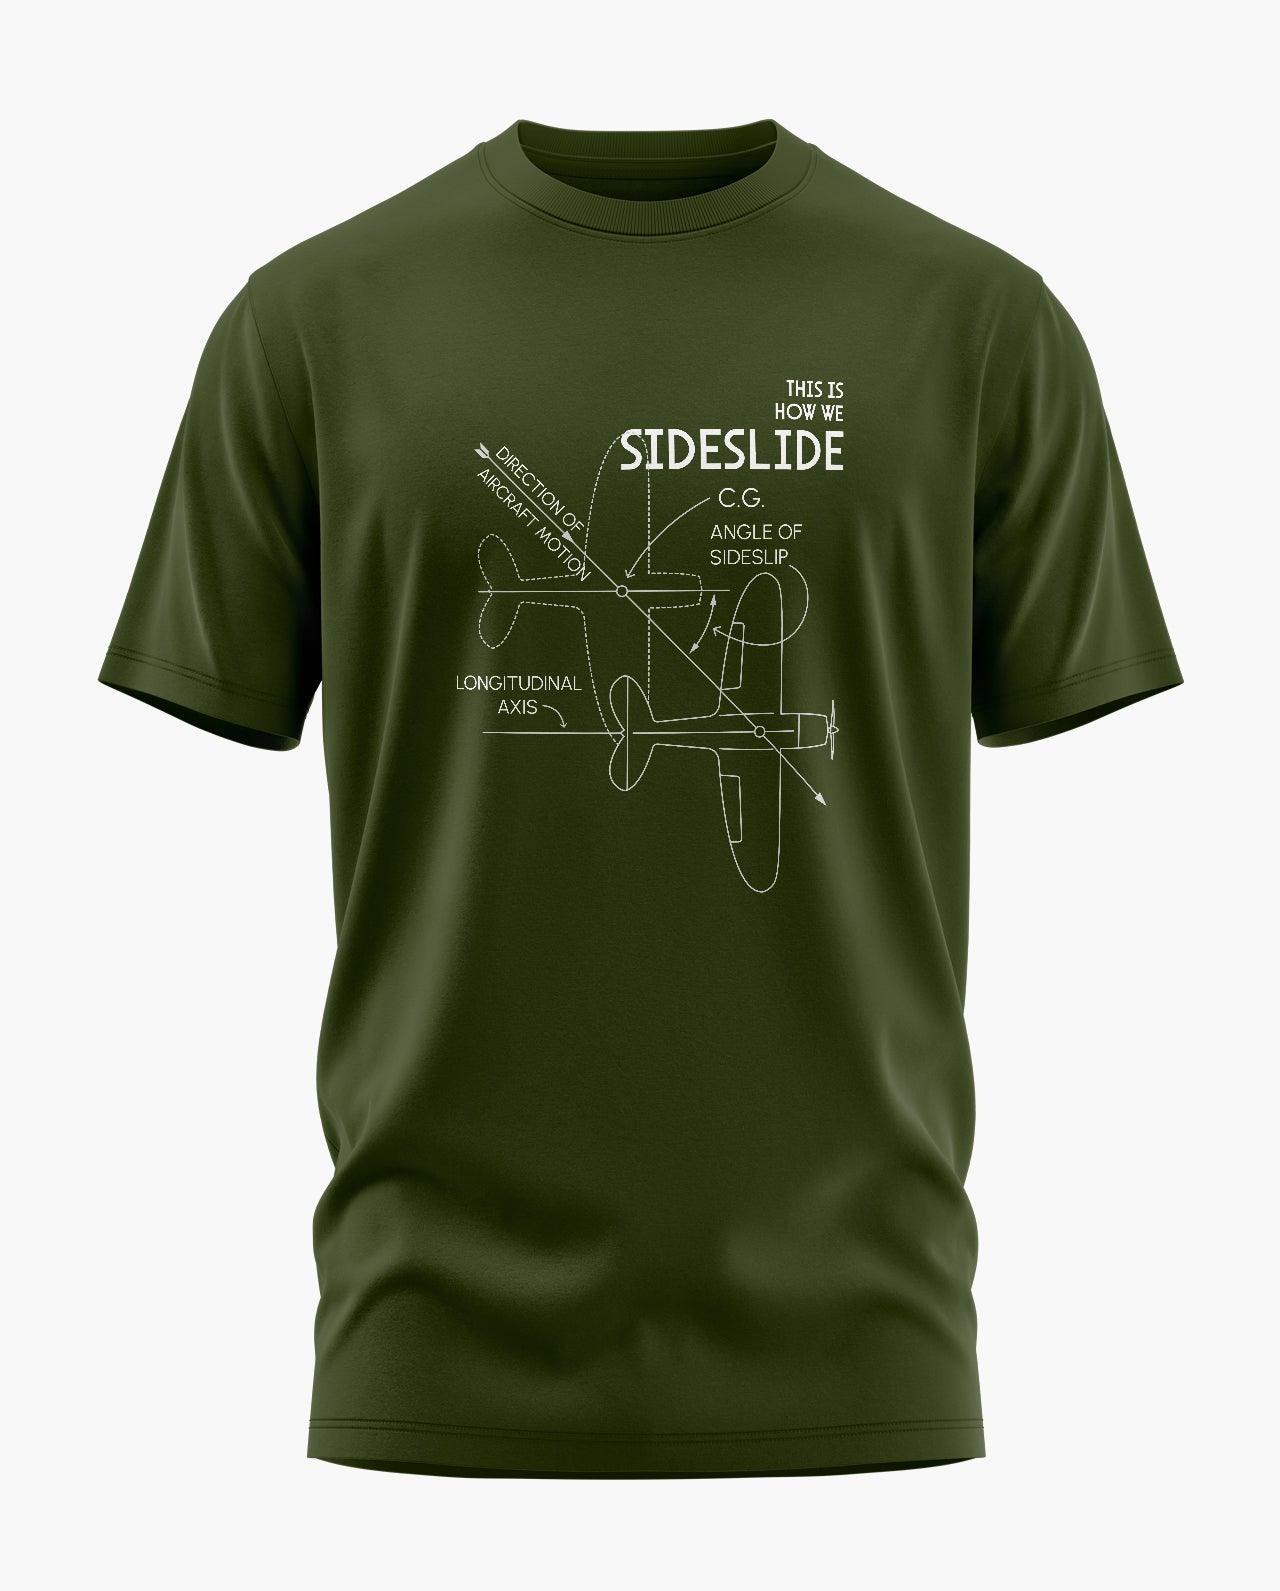 This is How We Sideslide T-Shirt - Aero Armour